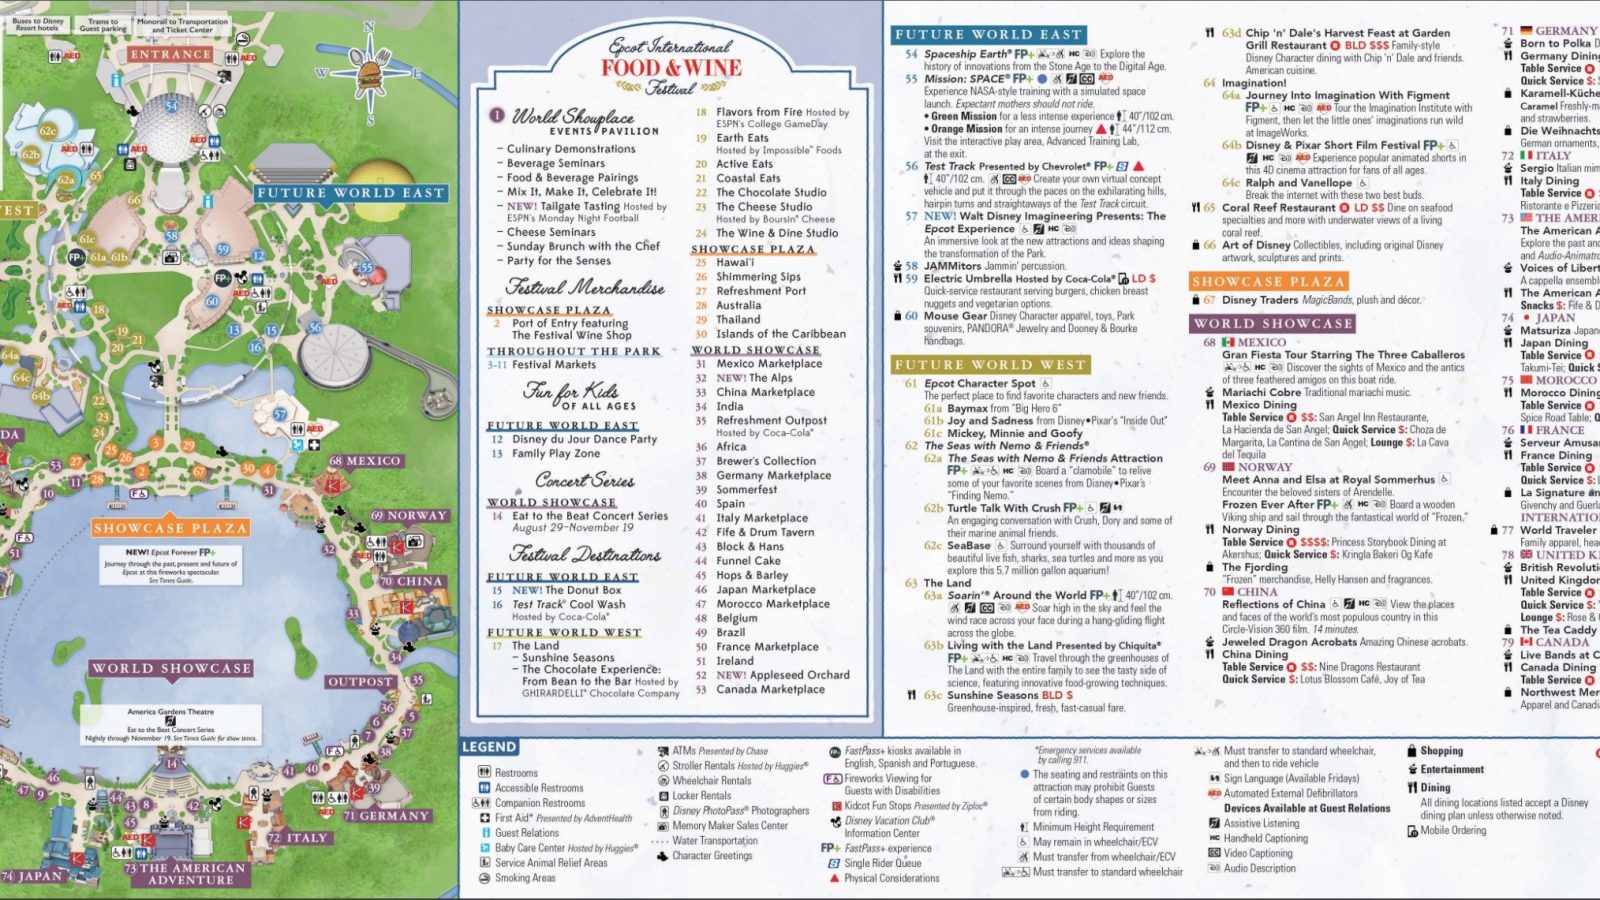 The Official Epcot Map from Disney Website